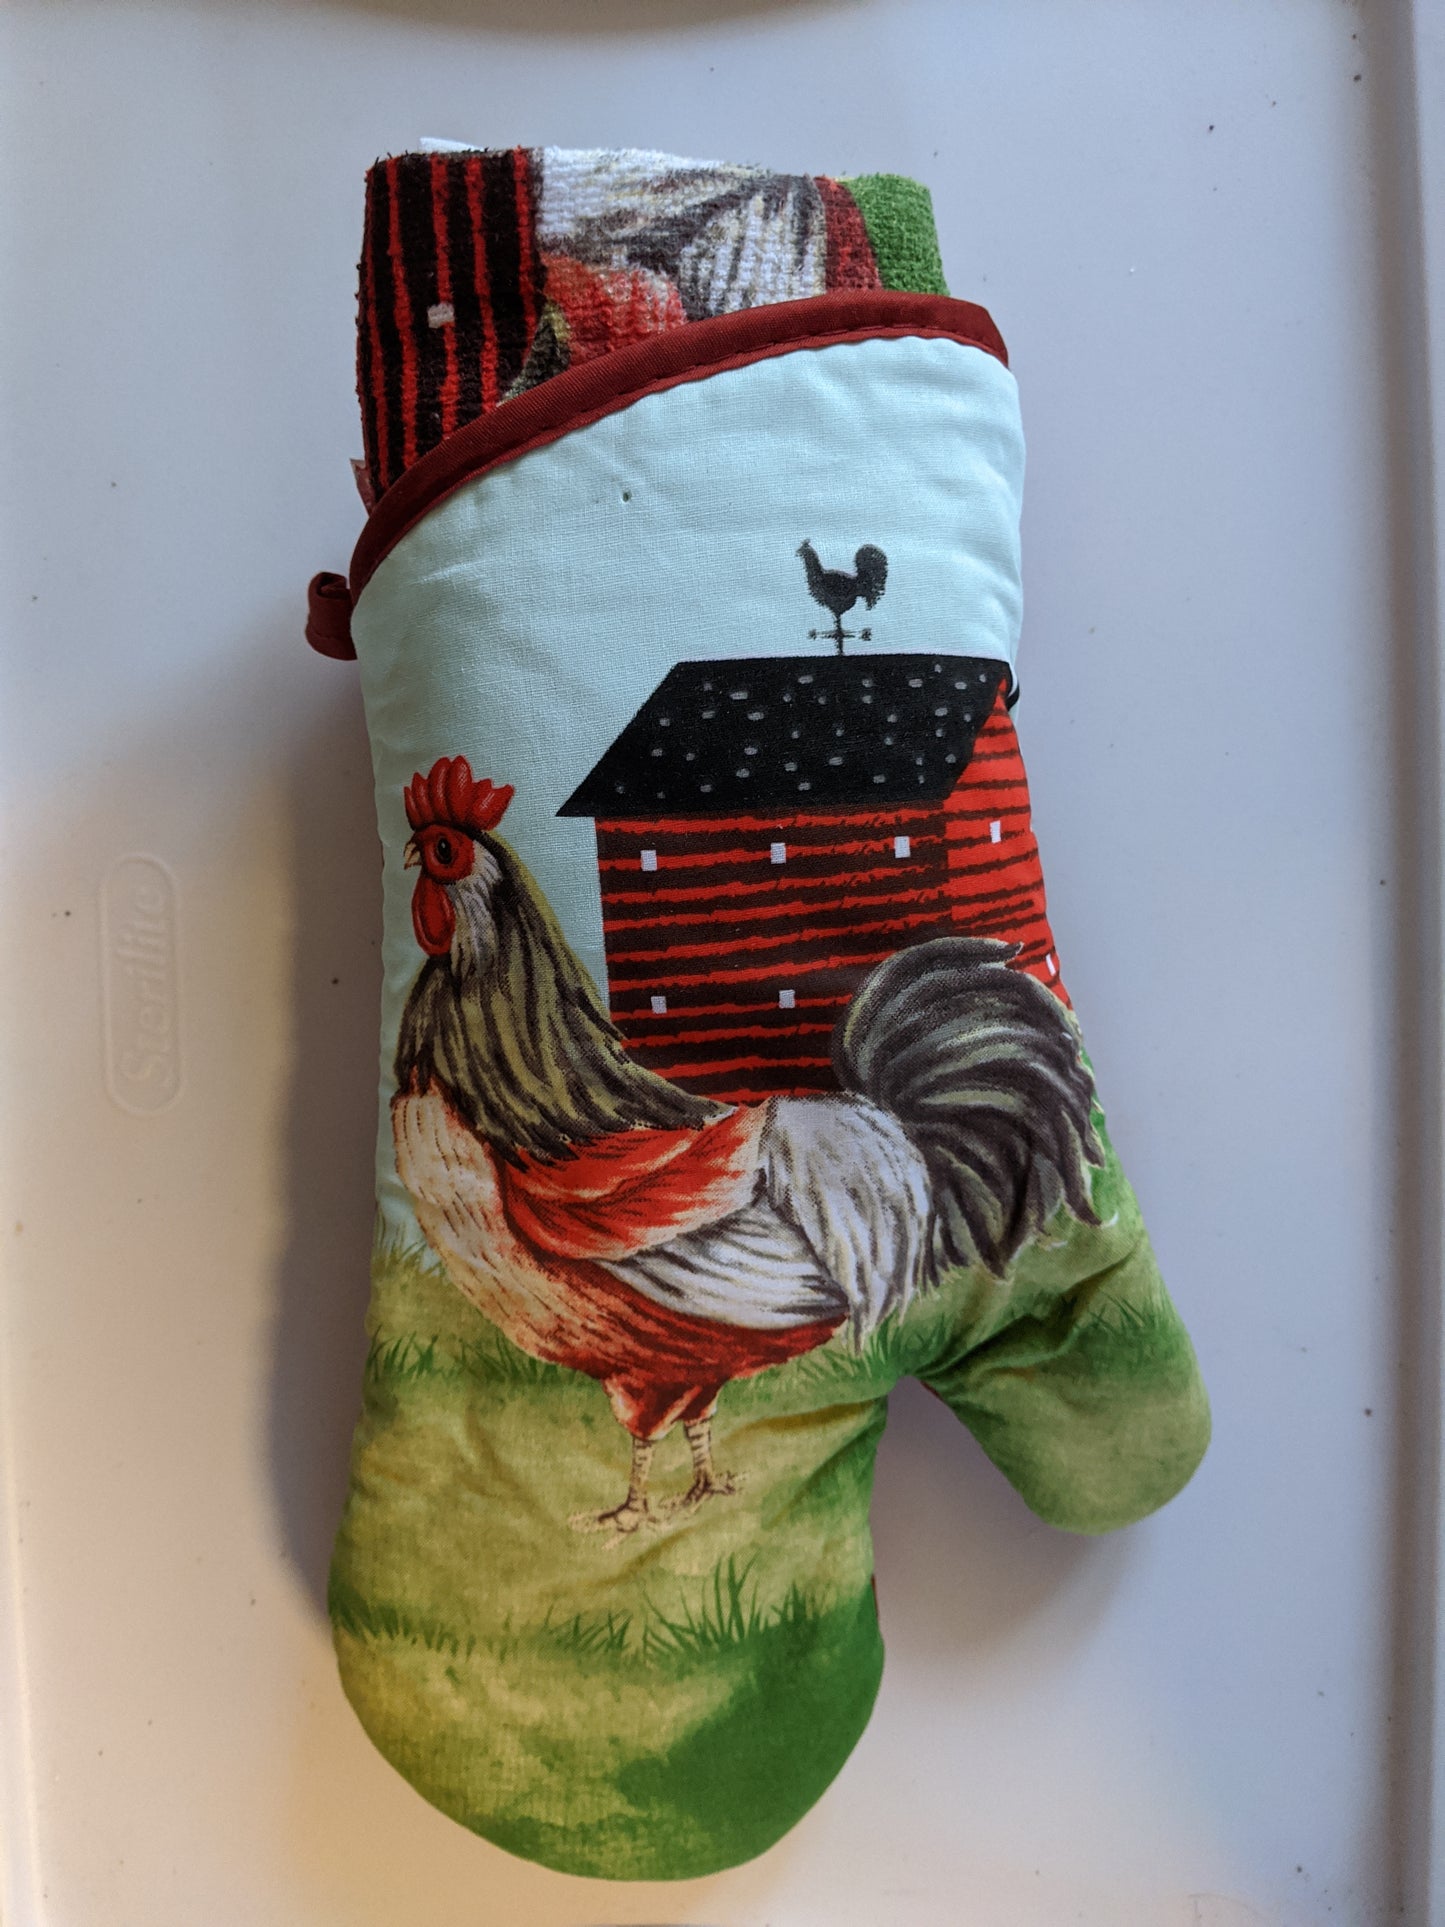 Rooster and Barn  Oven Mit with Hand Towel Spoon and  Fudge Brownie Mix Gift Set